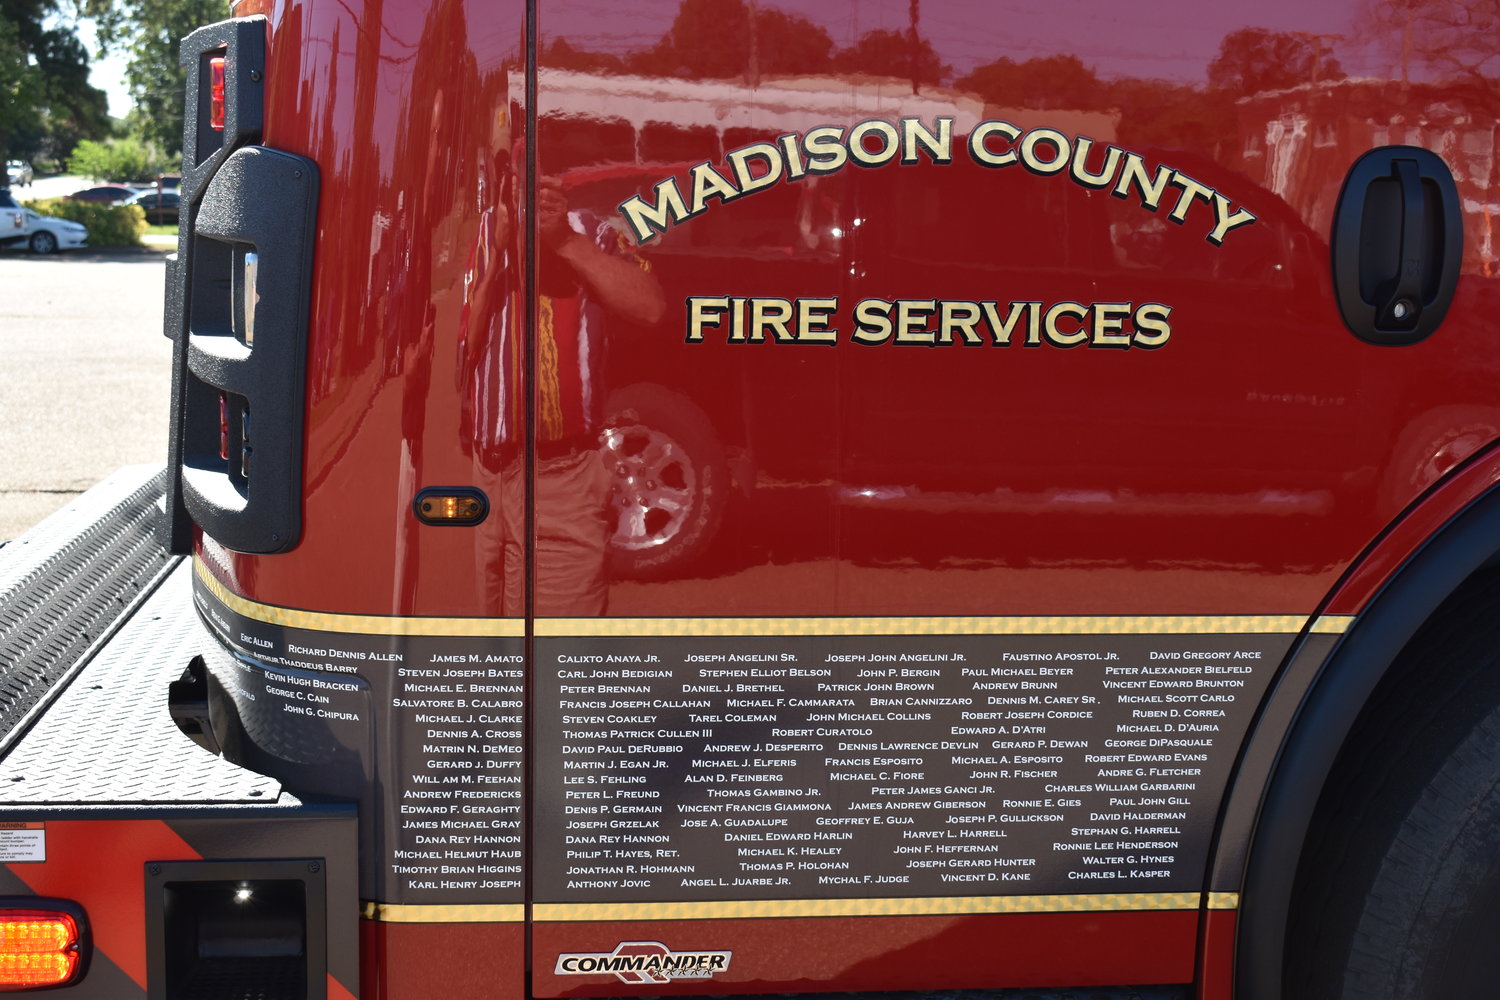 Madison County's new fire truck bears the names of New York City firefighters who were killed responding to the 9-11 terrorist attacks in New York City.